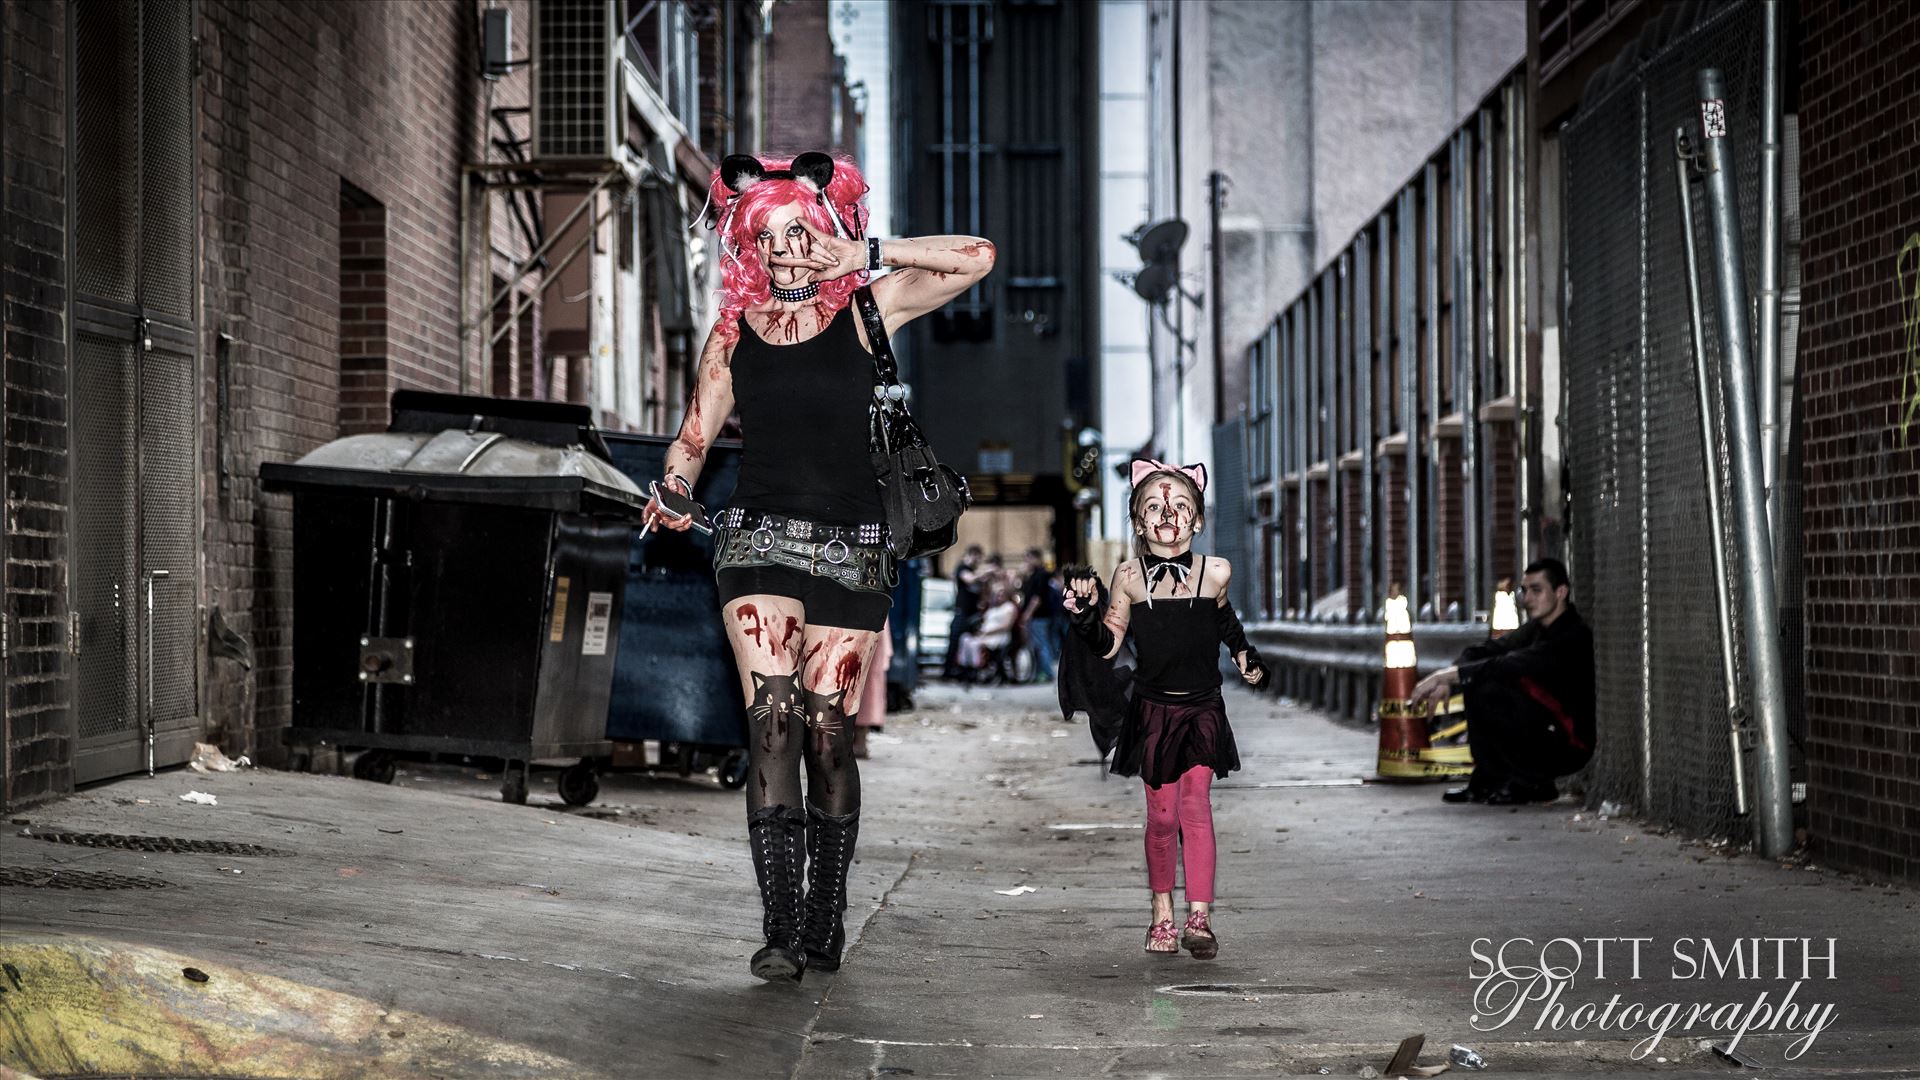 Denver Zombie Crawl 2015 18 An adorable mother and daughter walking through an alley during Denver's 2015 Zombie Crawl. by Scott Smith Photos